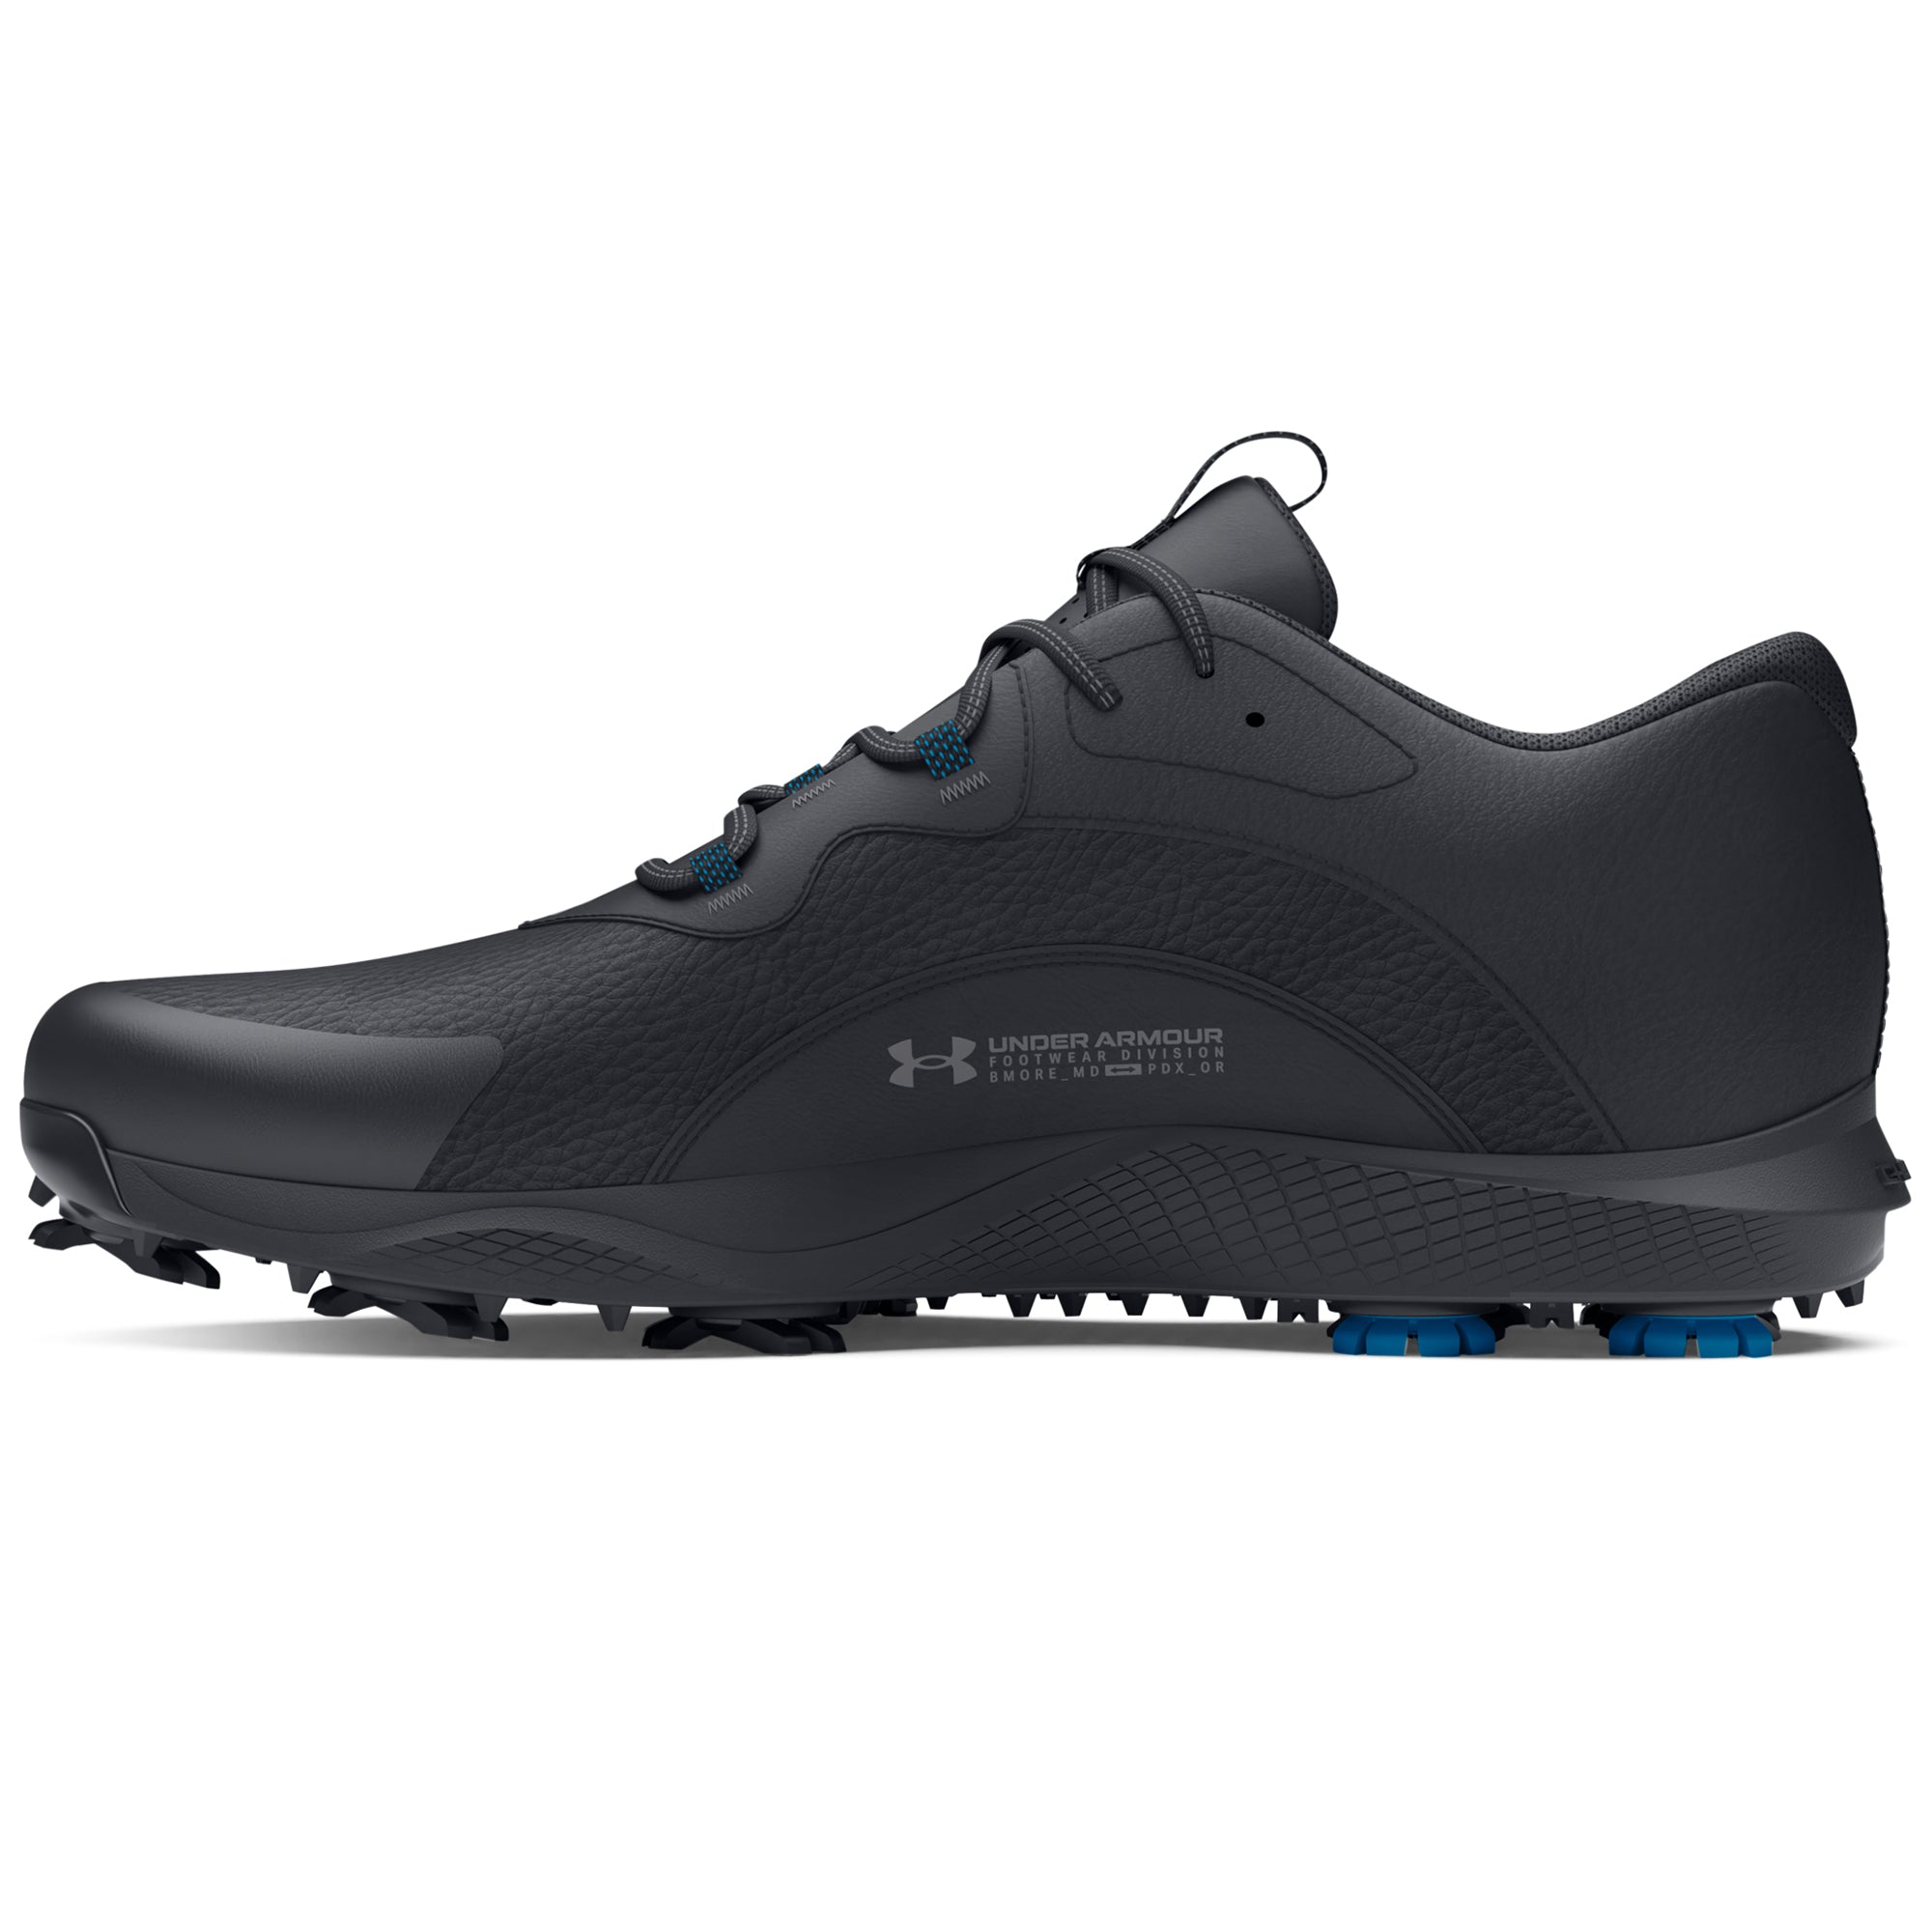 under-armour-charged-draw-2-e-golf-shoes-3026401-black-003